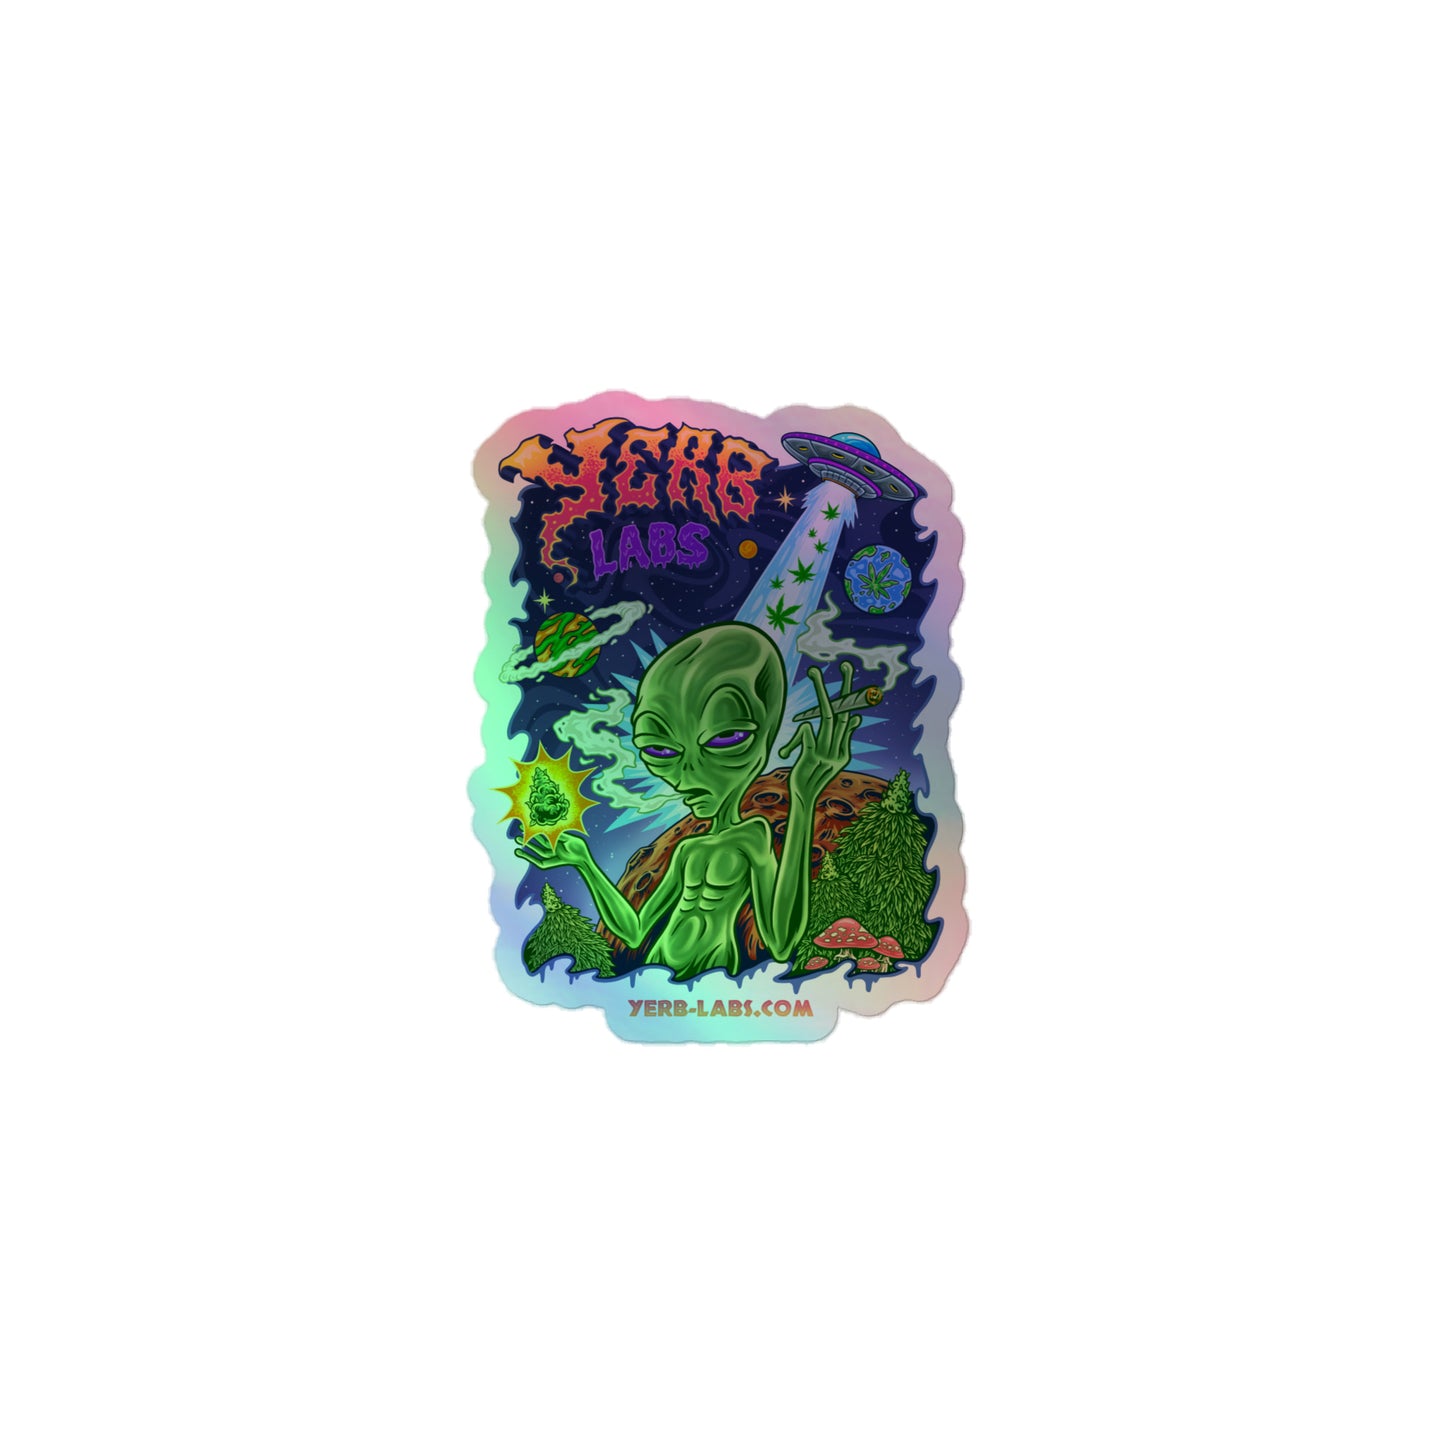 Yerb Labs Holographic stickers